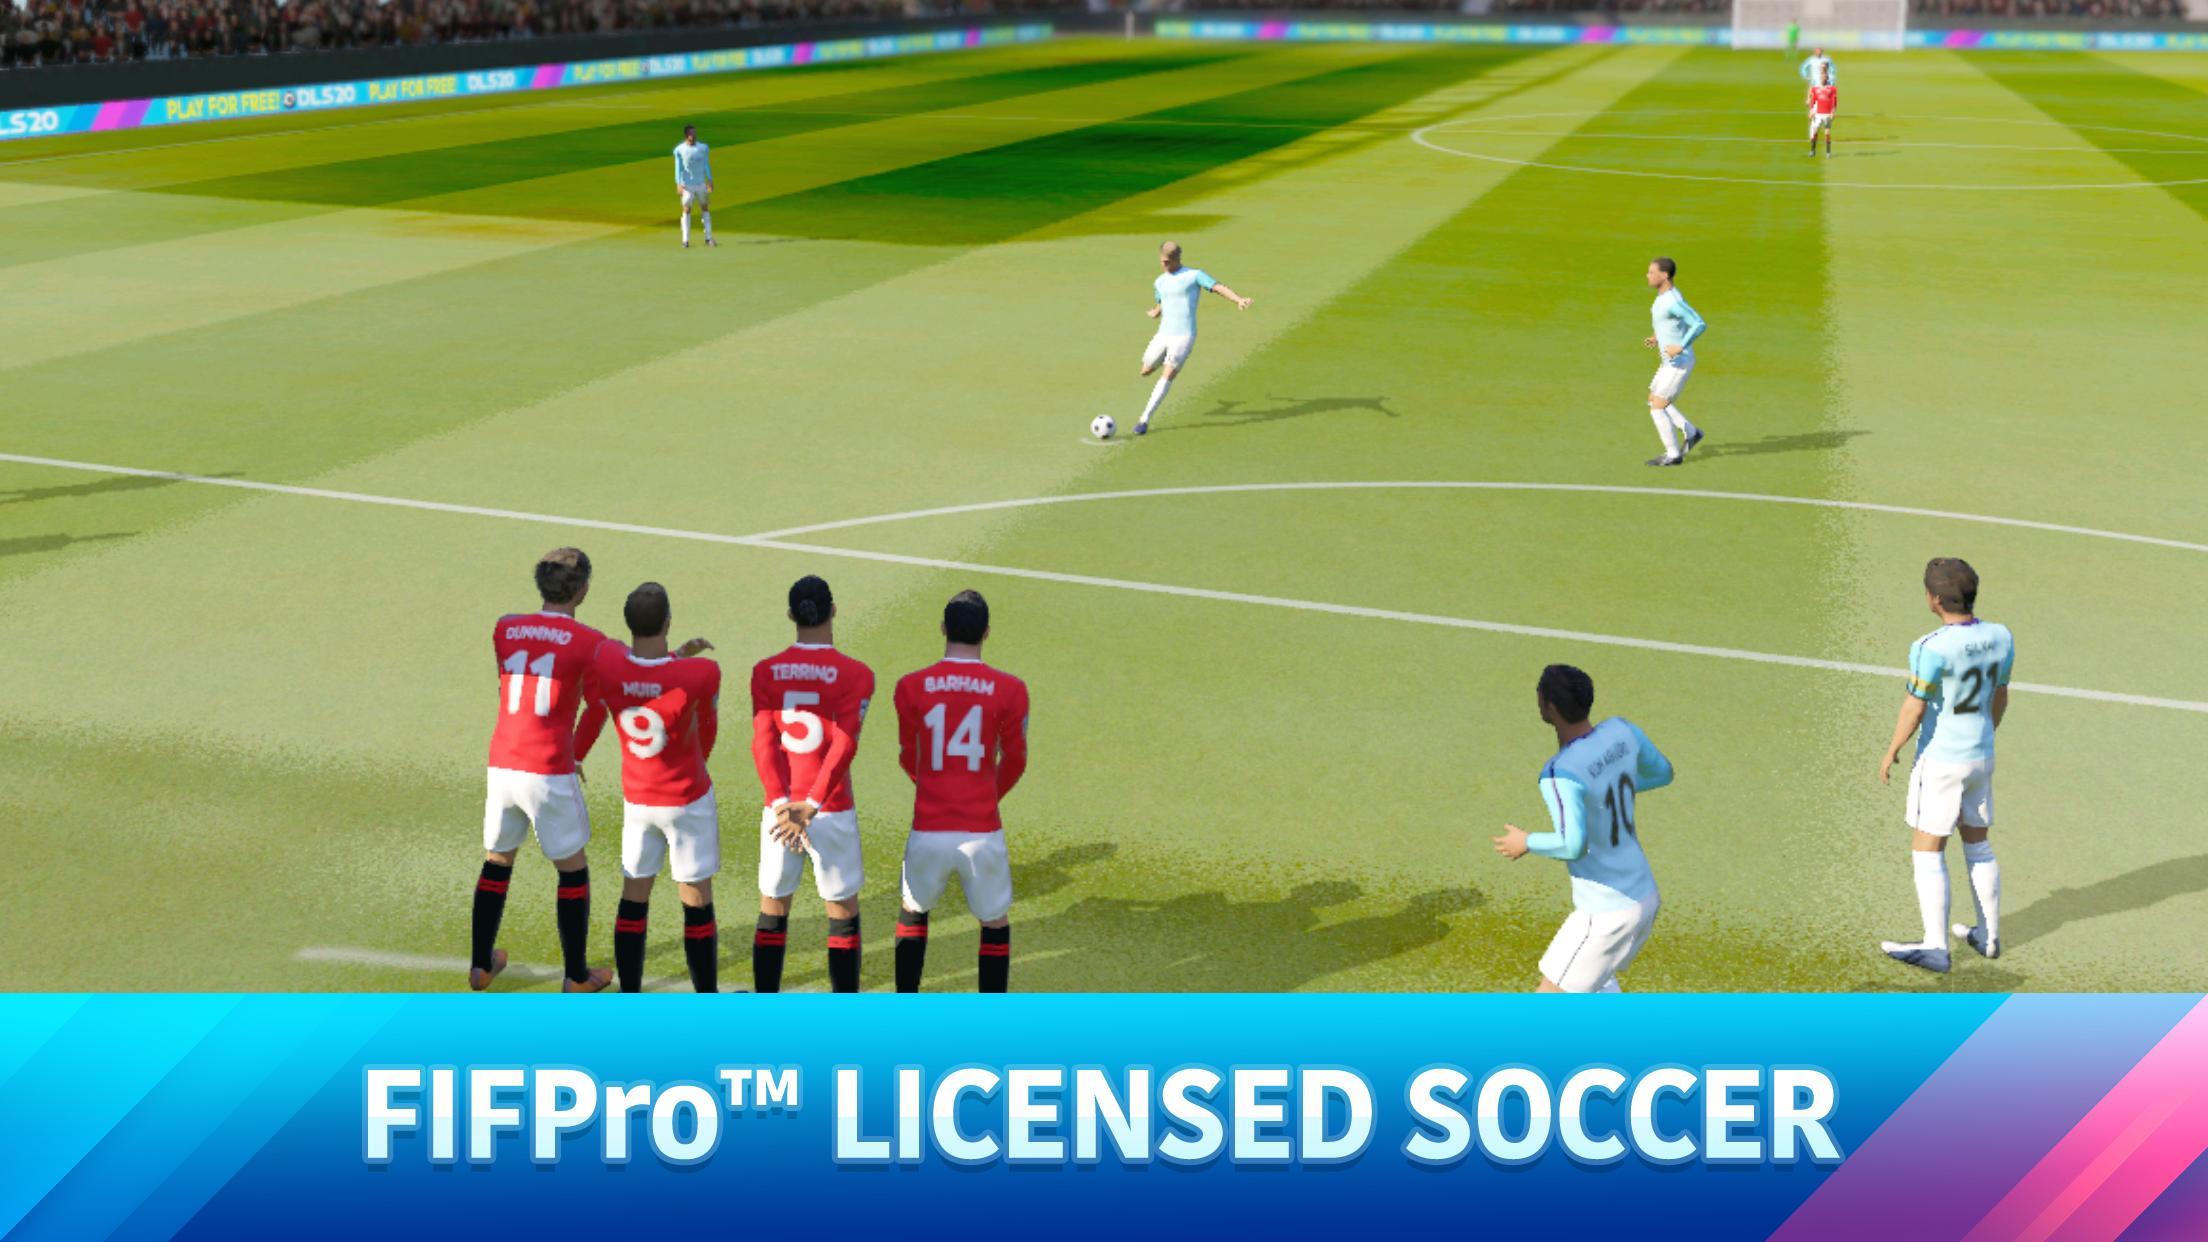 Dream League Soccer 2020 for Android - APK Download